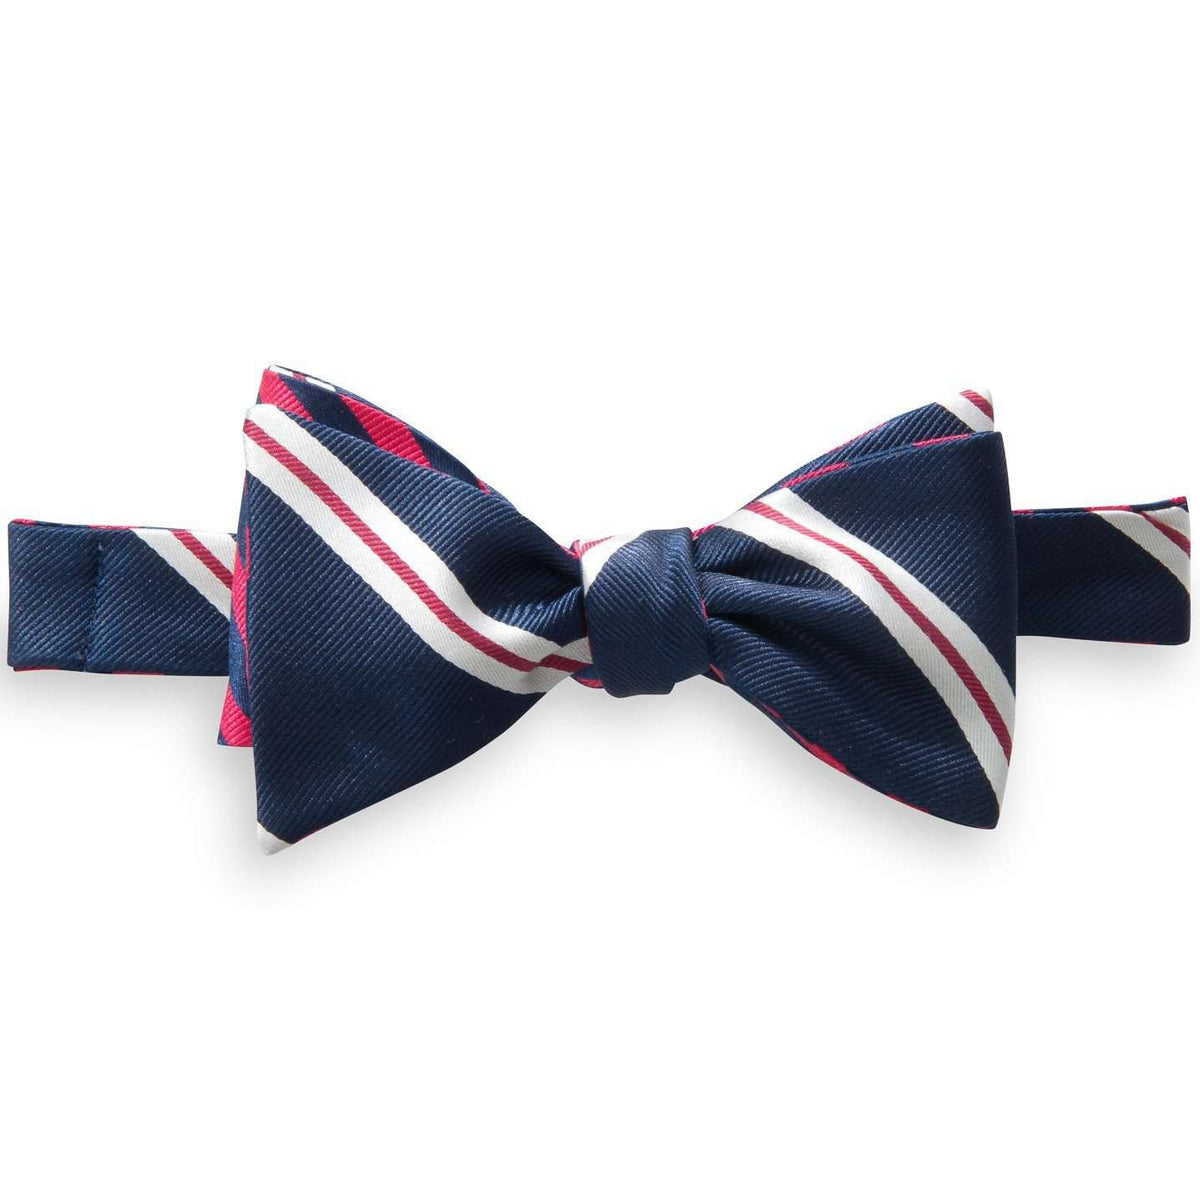 Lateral Stripe and Regimental Stripe Reversible Bow Tie in Navy and Red by Southern Tide - Country Club Prep